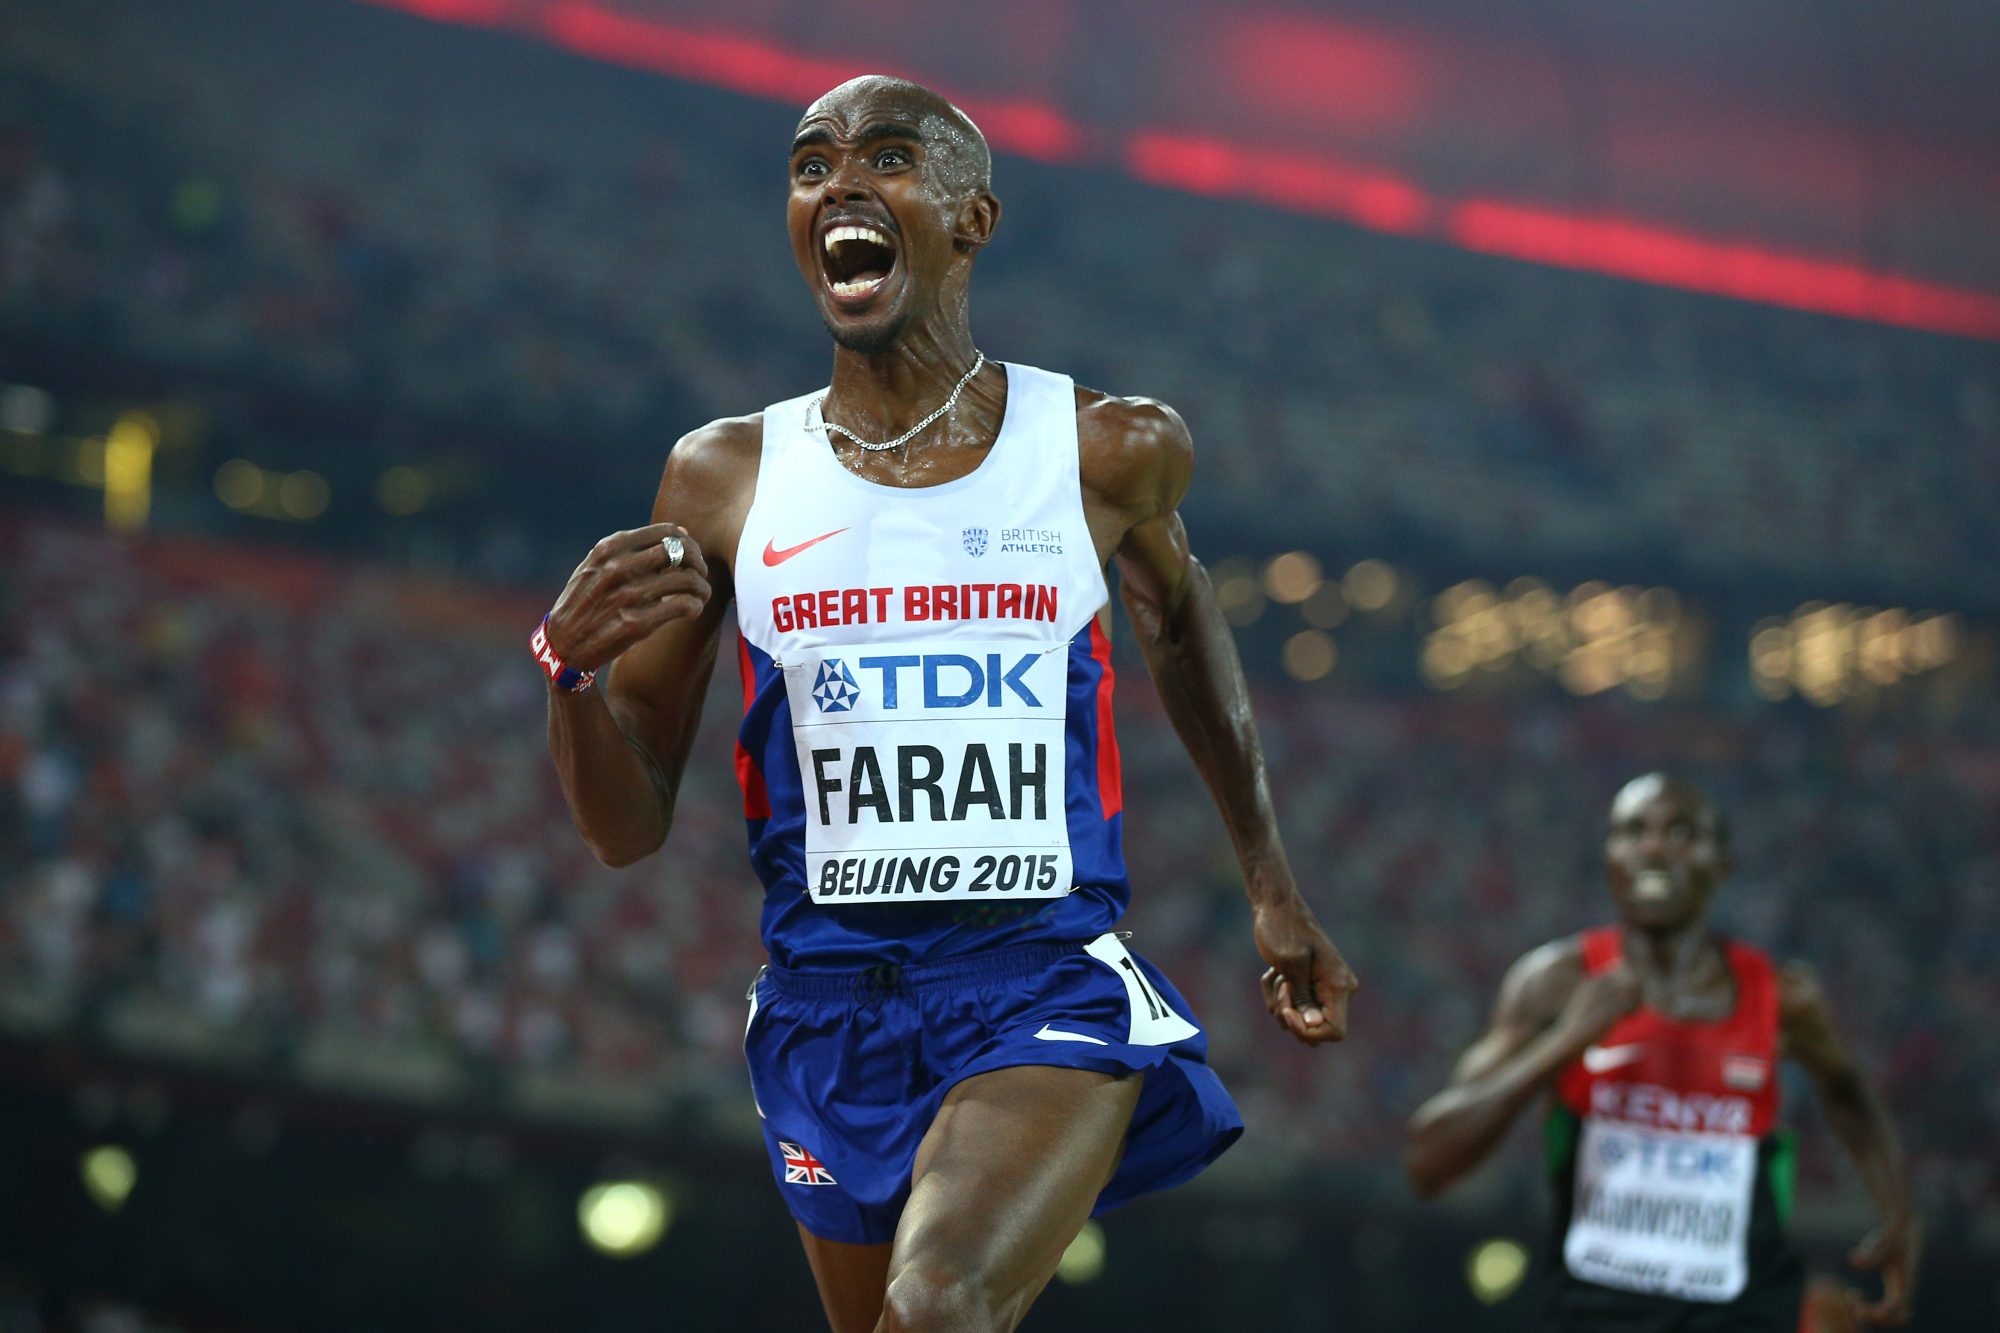 Mo Farah, Taken from family, Trafficked at age 9, Olympics, 2000x1340 HD Desktop